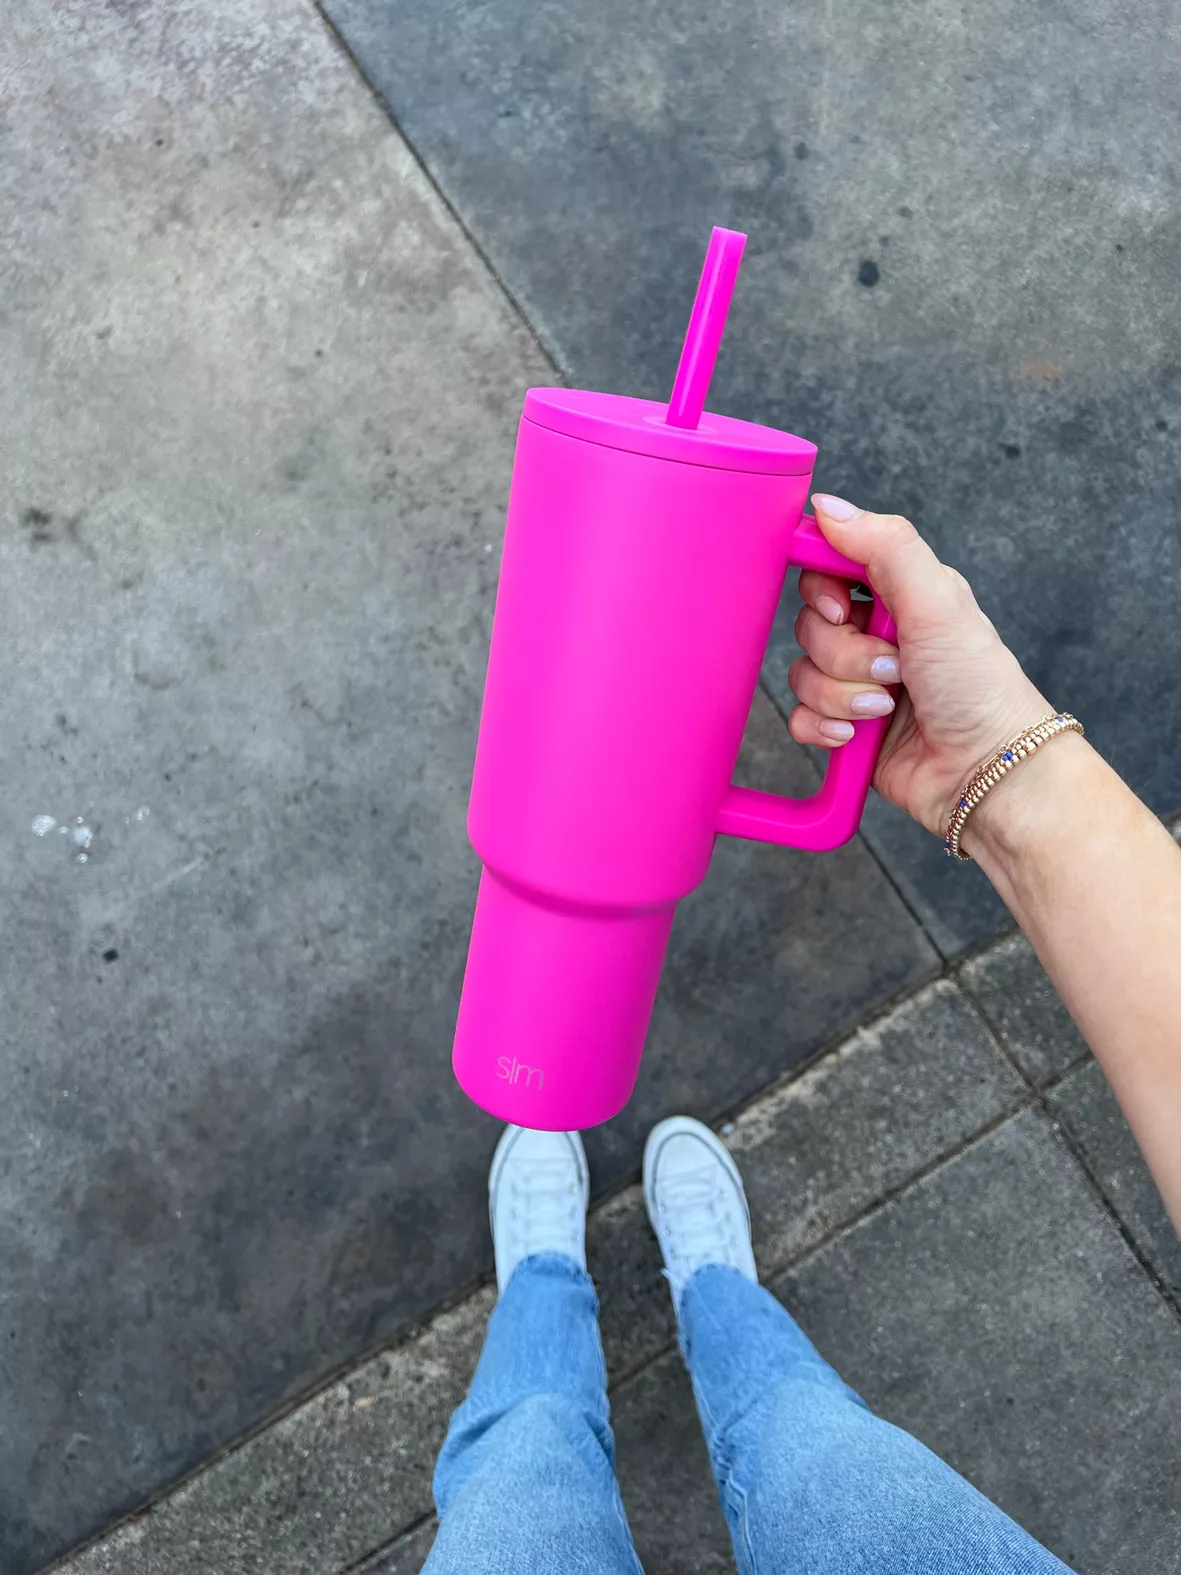 LouisG 40 OZ Travel Tumbler with Handle - Hot Pink